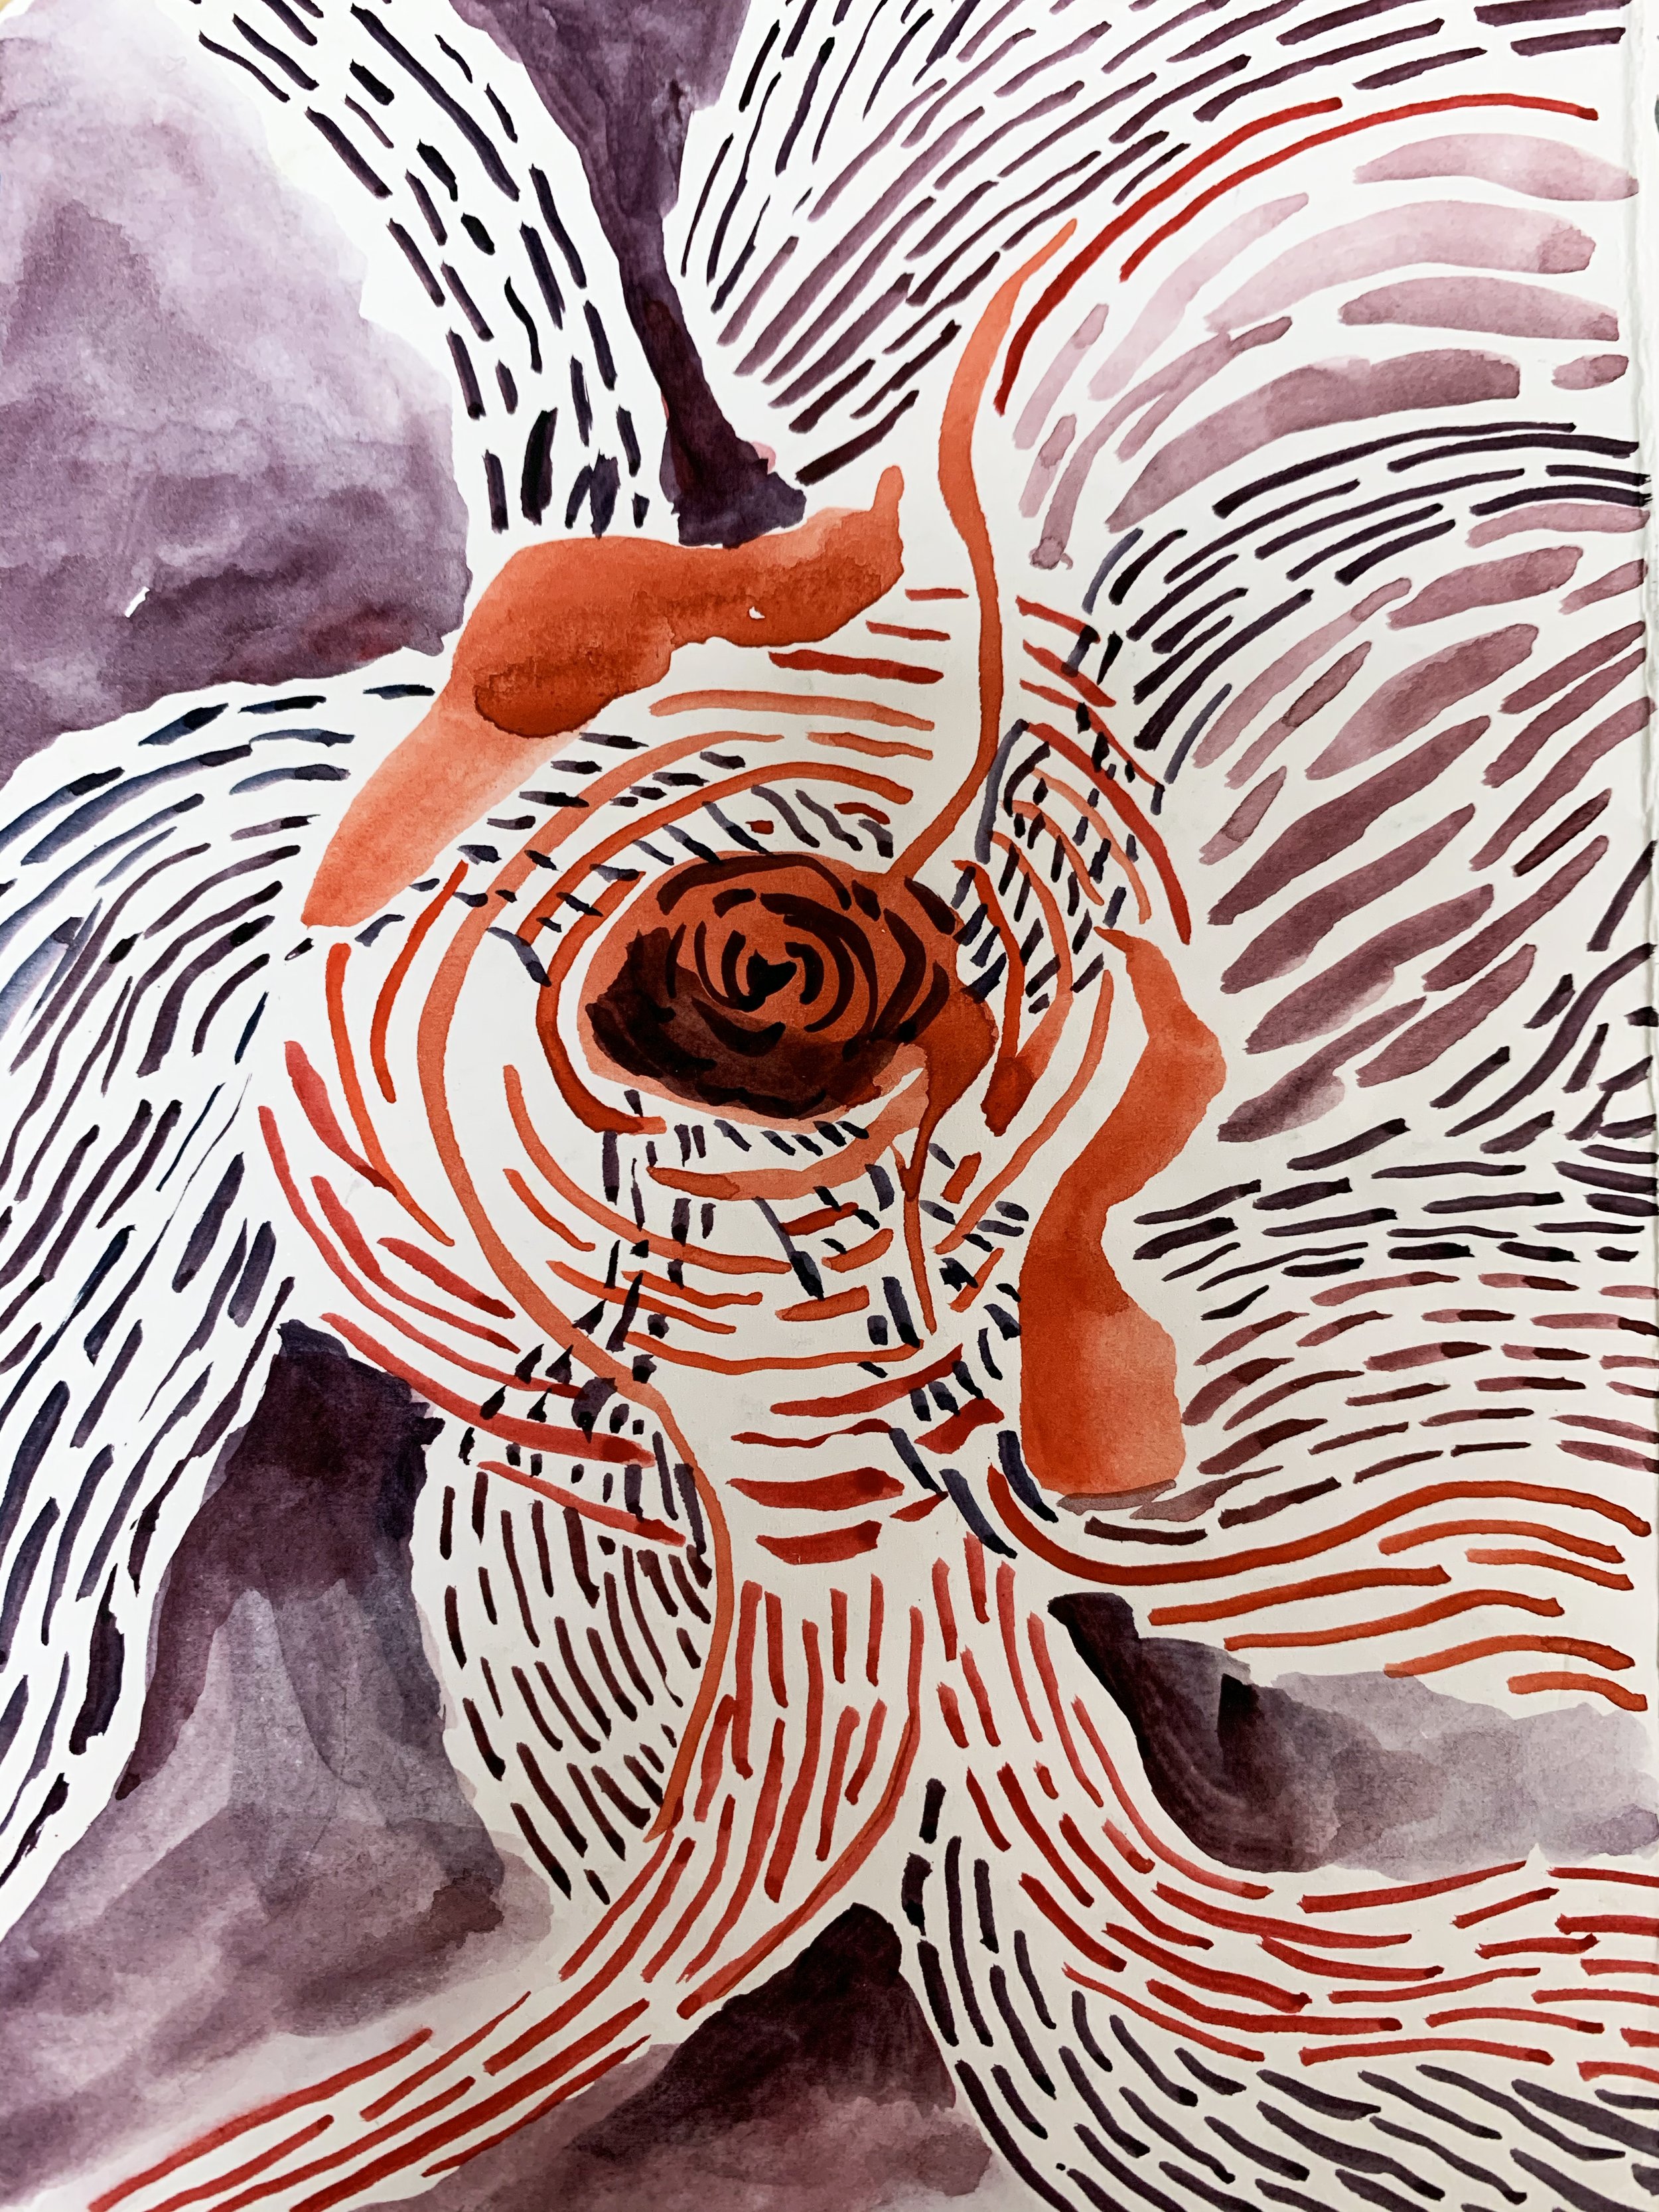    The Virus Series: 01 - Untitled    Watercolor, 3 x 5 inches 